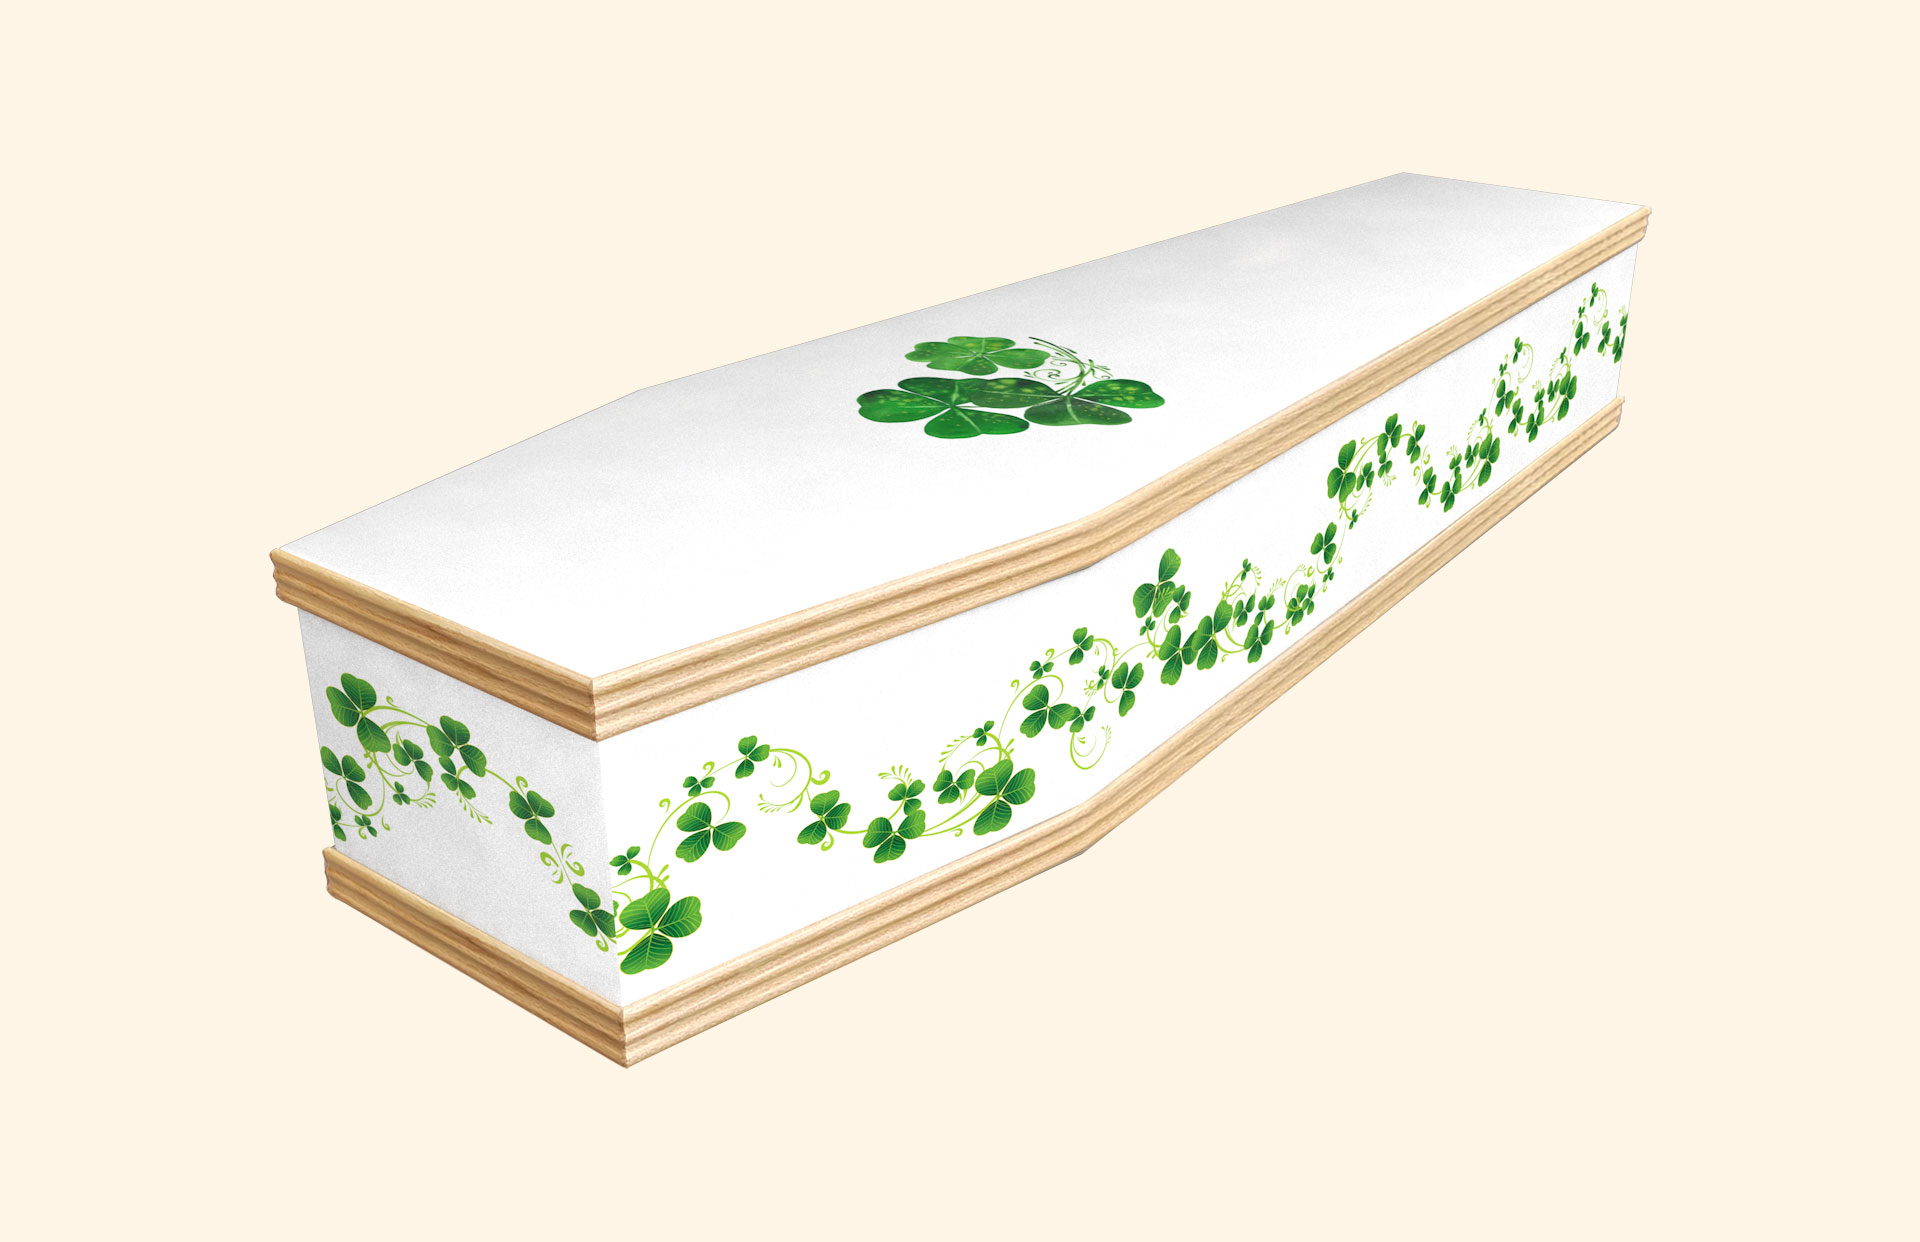 Clover design on a classic coffin